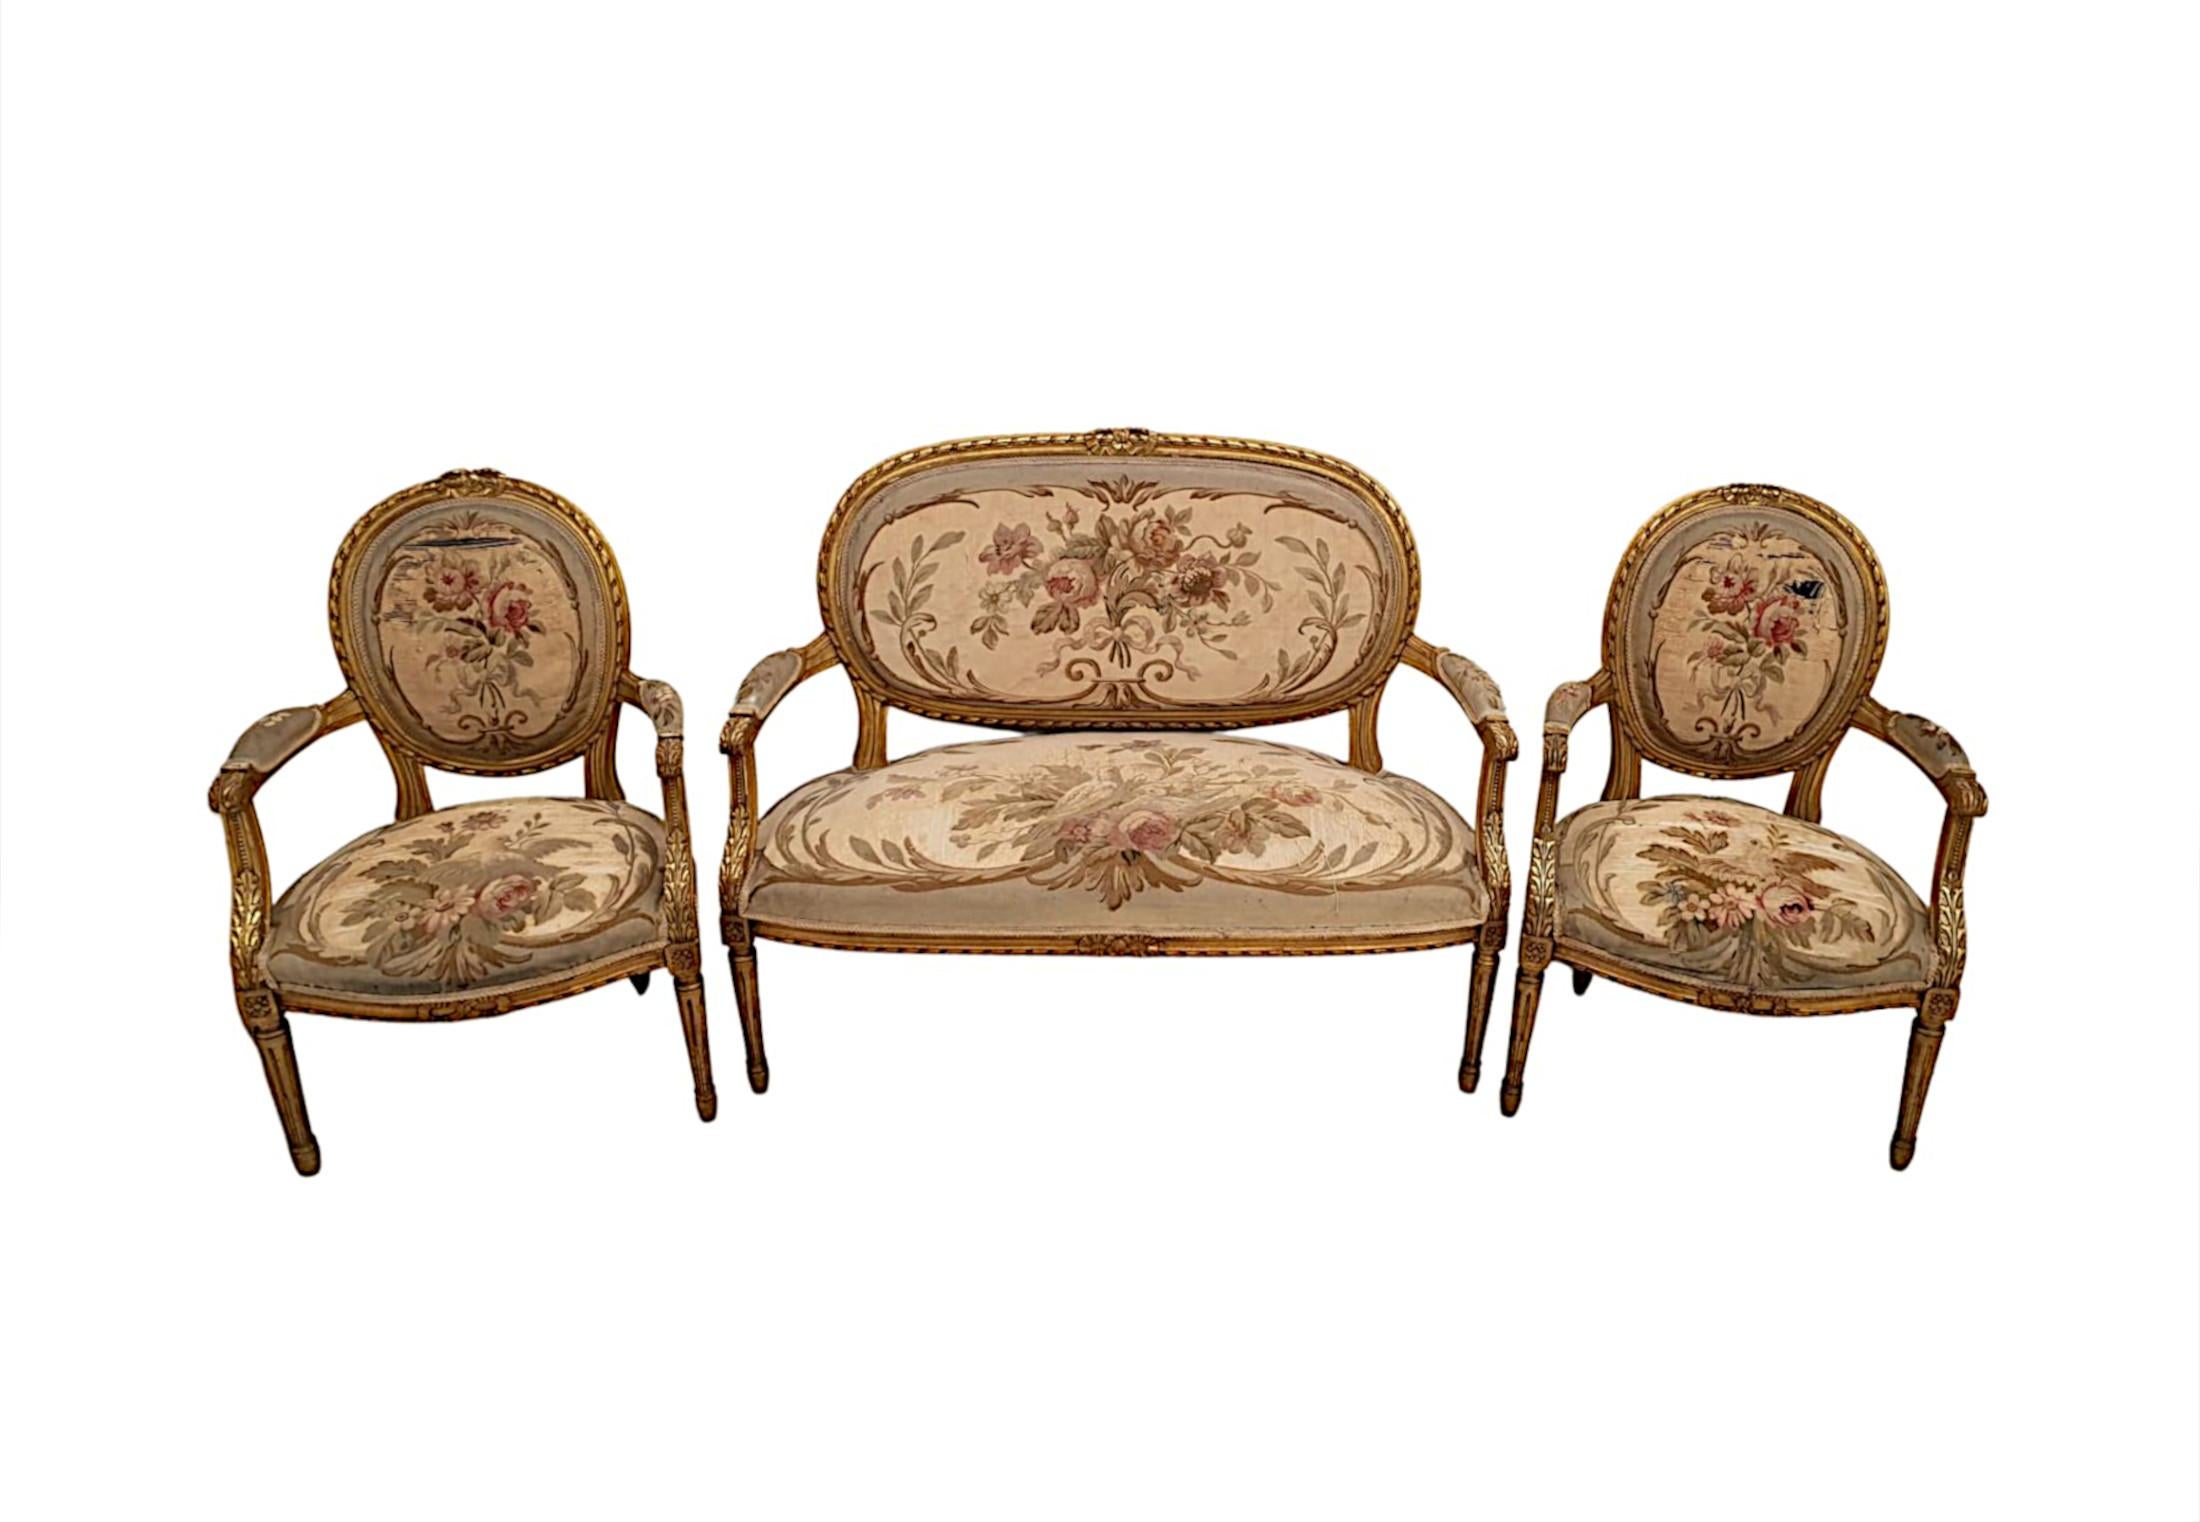 A beautiful 19th century giltwood suite of neat proportions and fabulous quality, comprising of a two seater sofa and two matching armchairs, upholstered in silk with delicate trailing foliate and flowerhead pattern detail in delicate hues of pink,